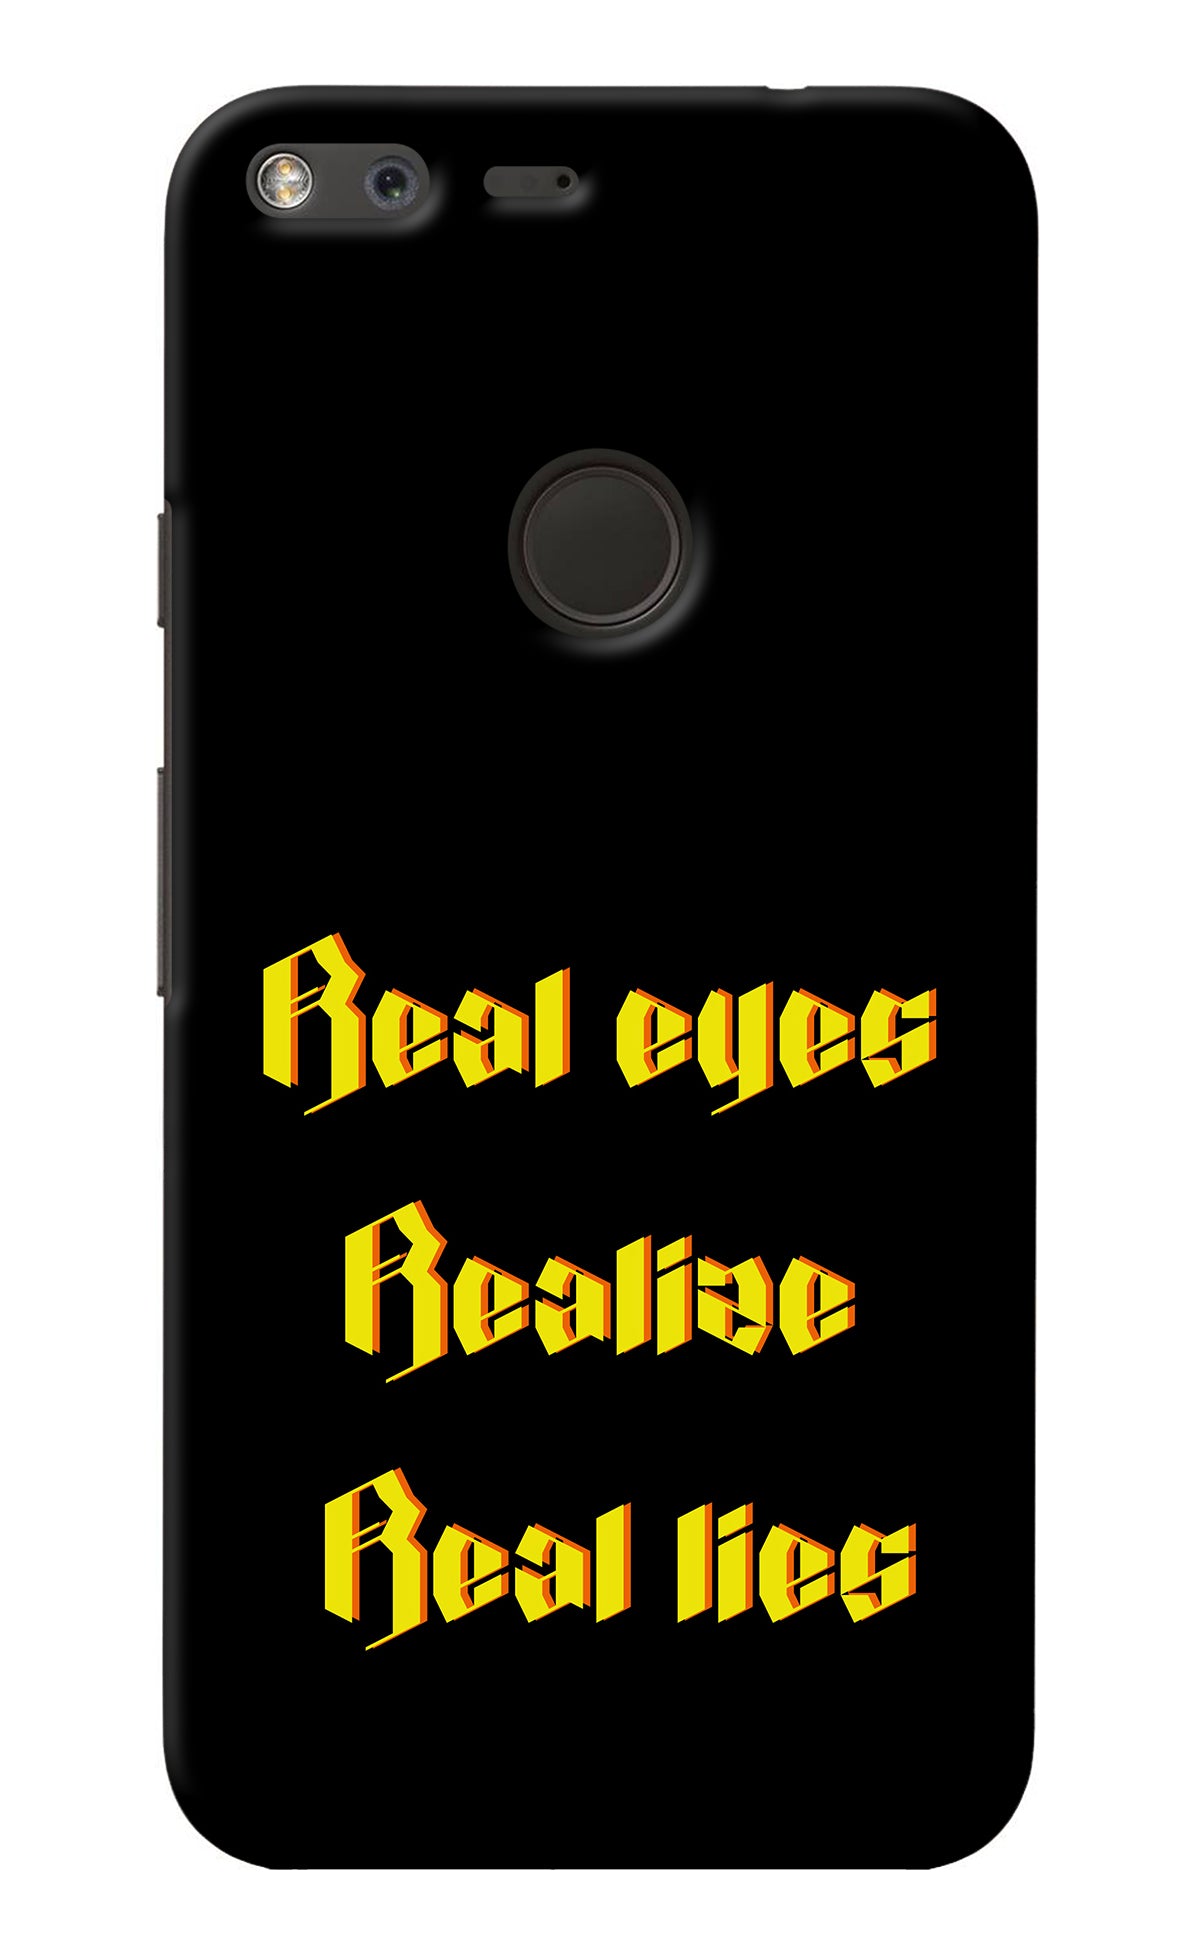 Real Eyes Realize Real Lies Google Pixel XL Back Cover